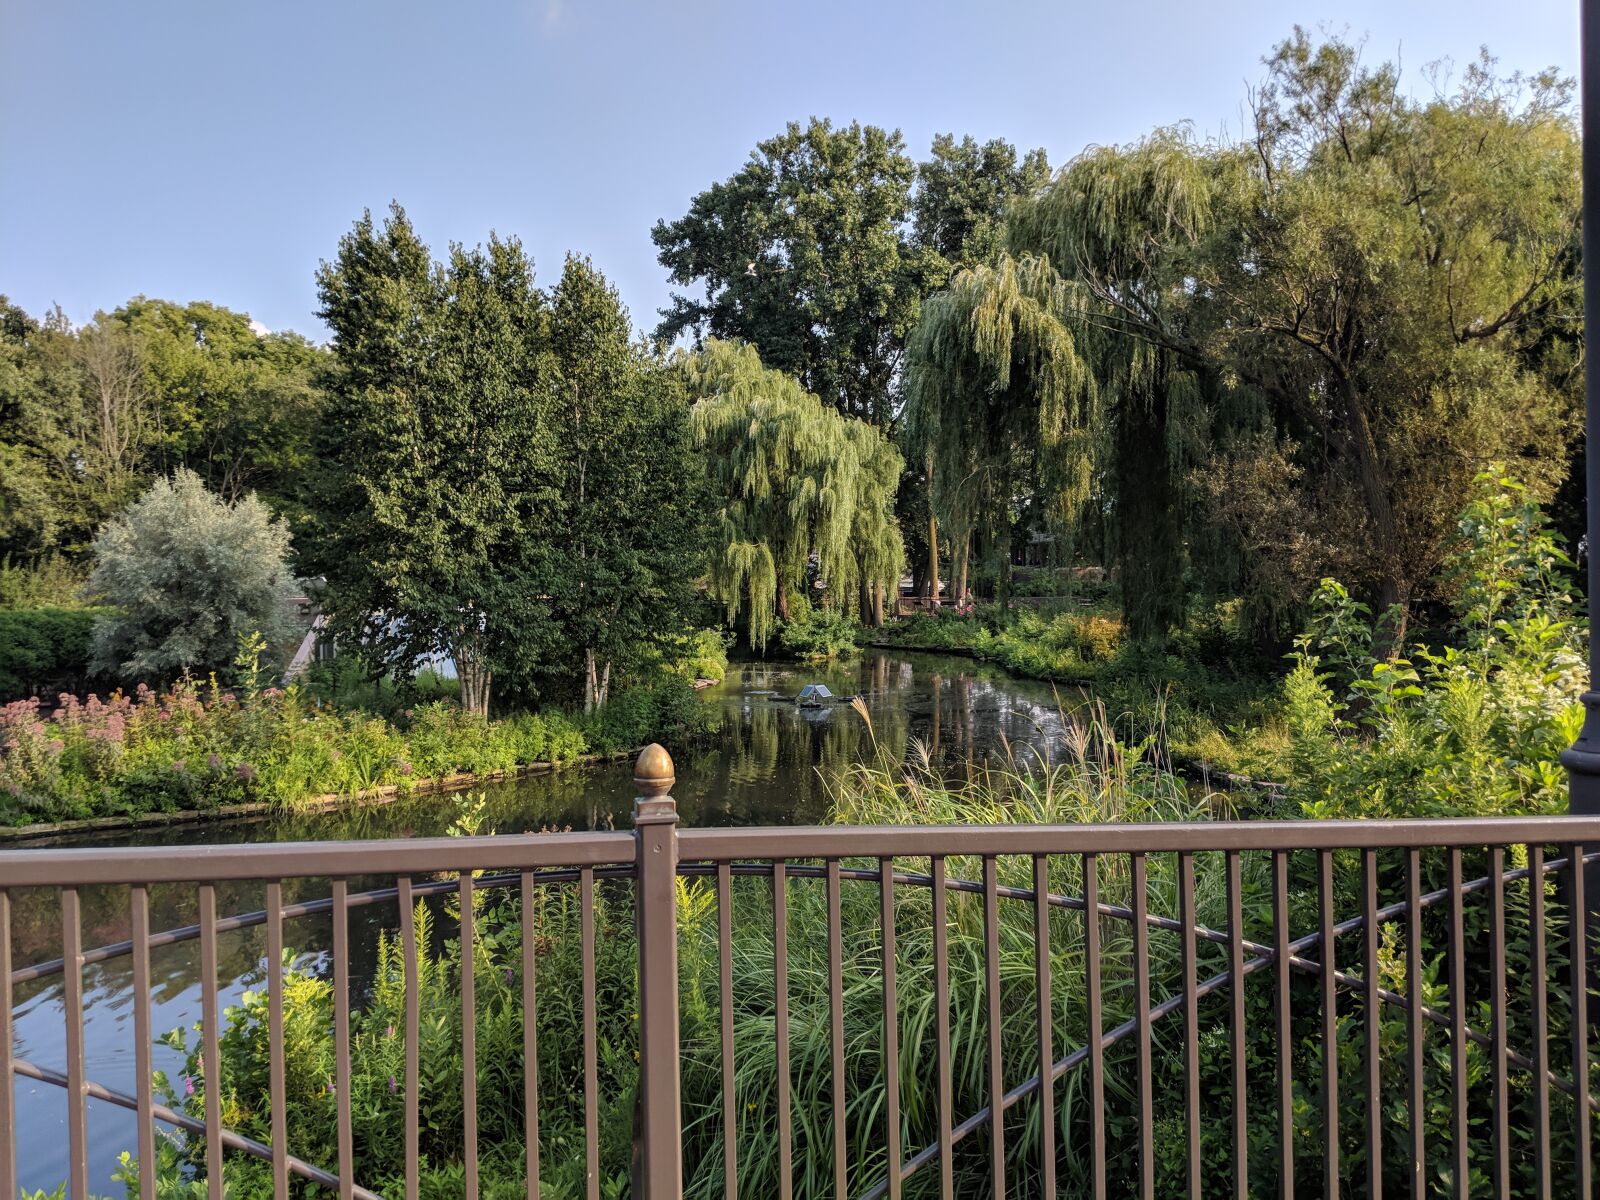 Google Pixel 2 sample photo. Chicago lincoln zoo, serenity photography